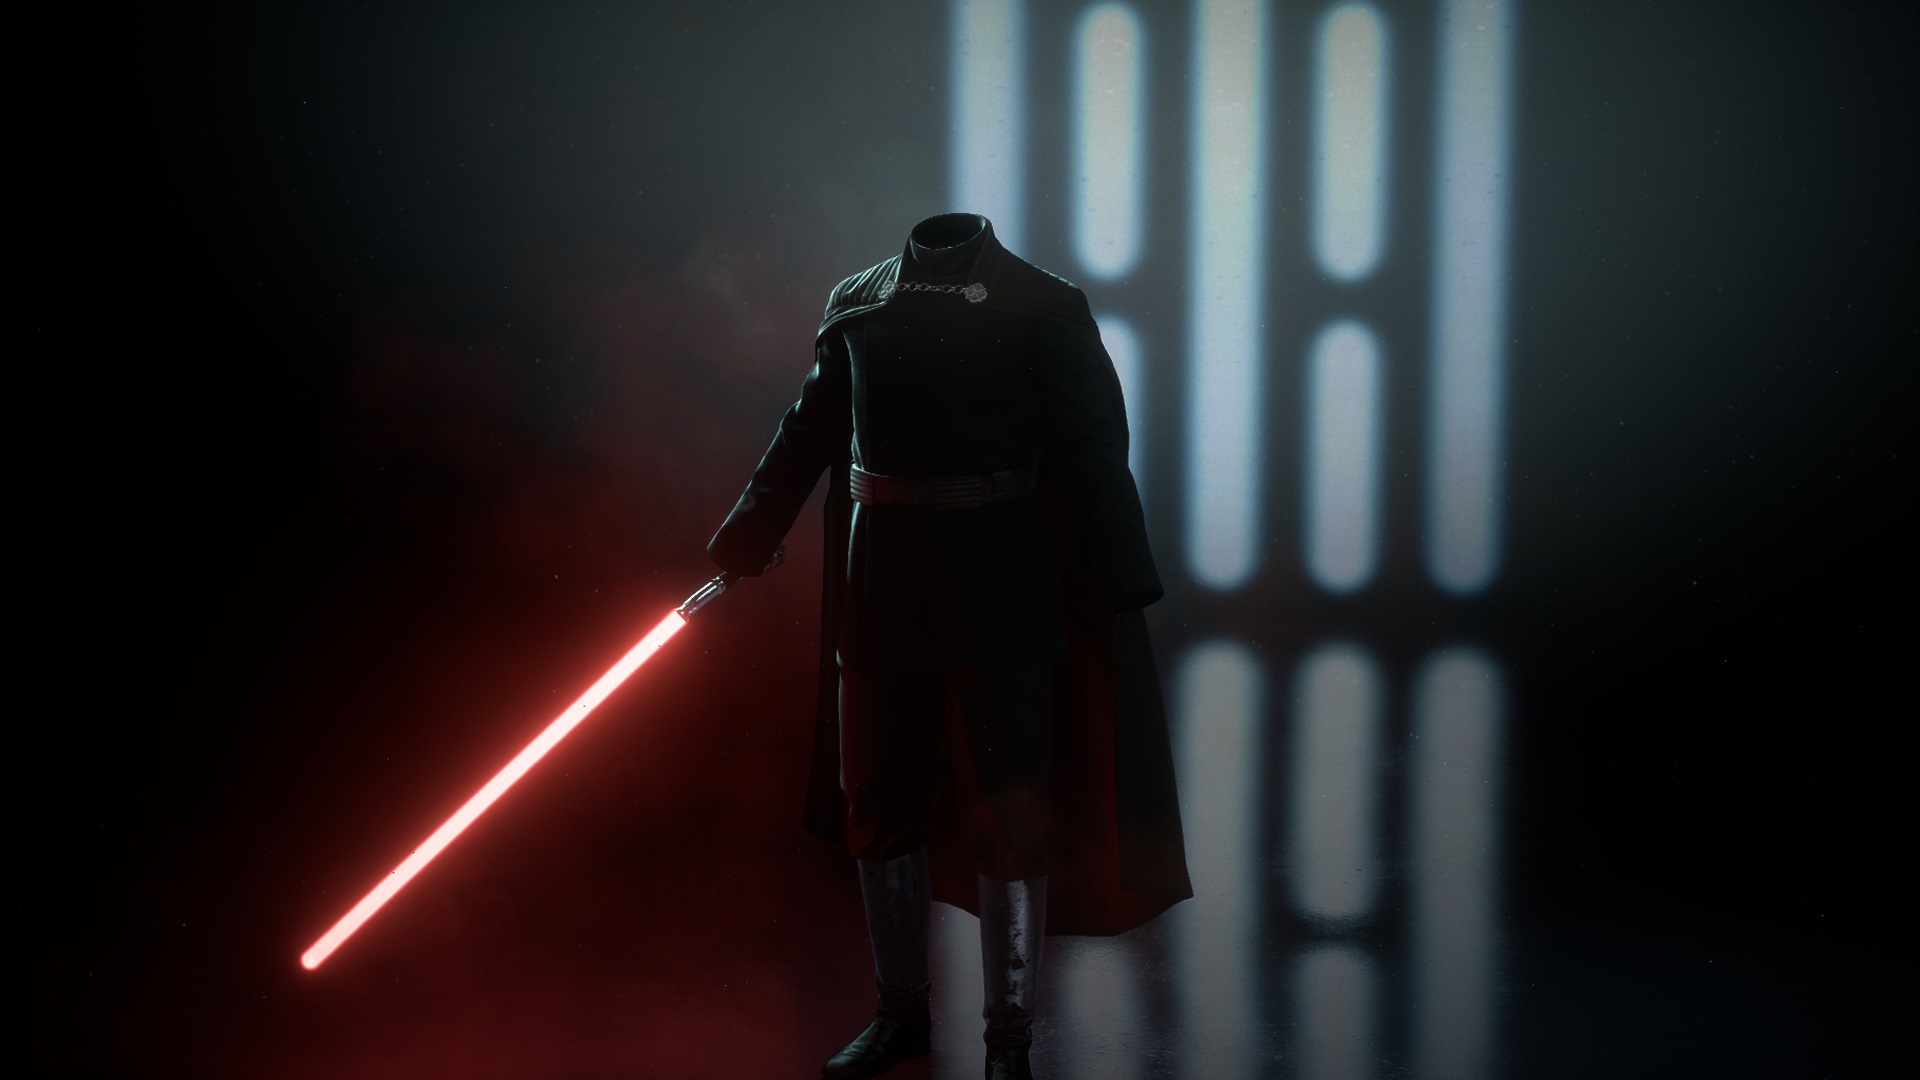 Mod lets you play as a headless, handless Count Dooku in Star Wars Battlefront 2